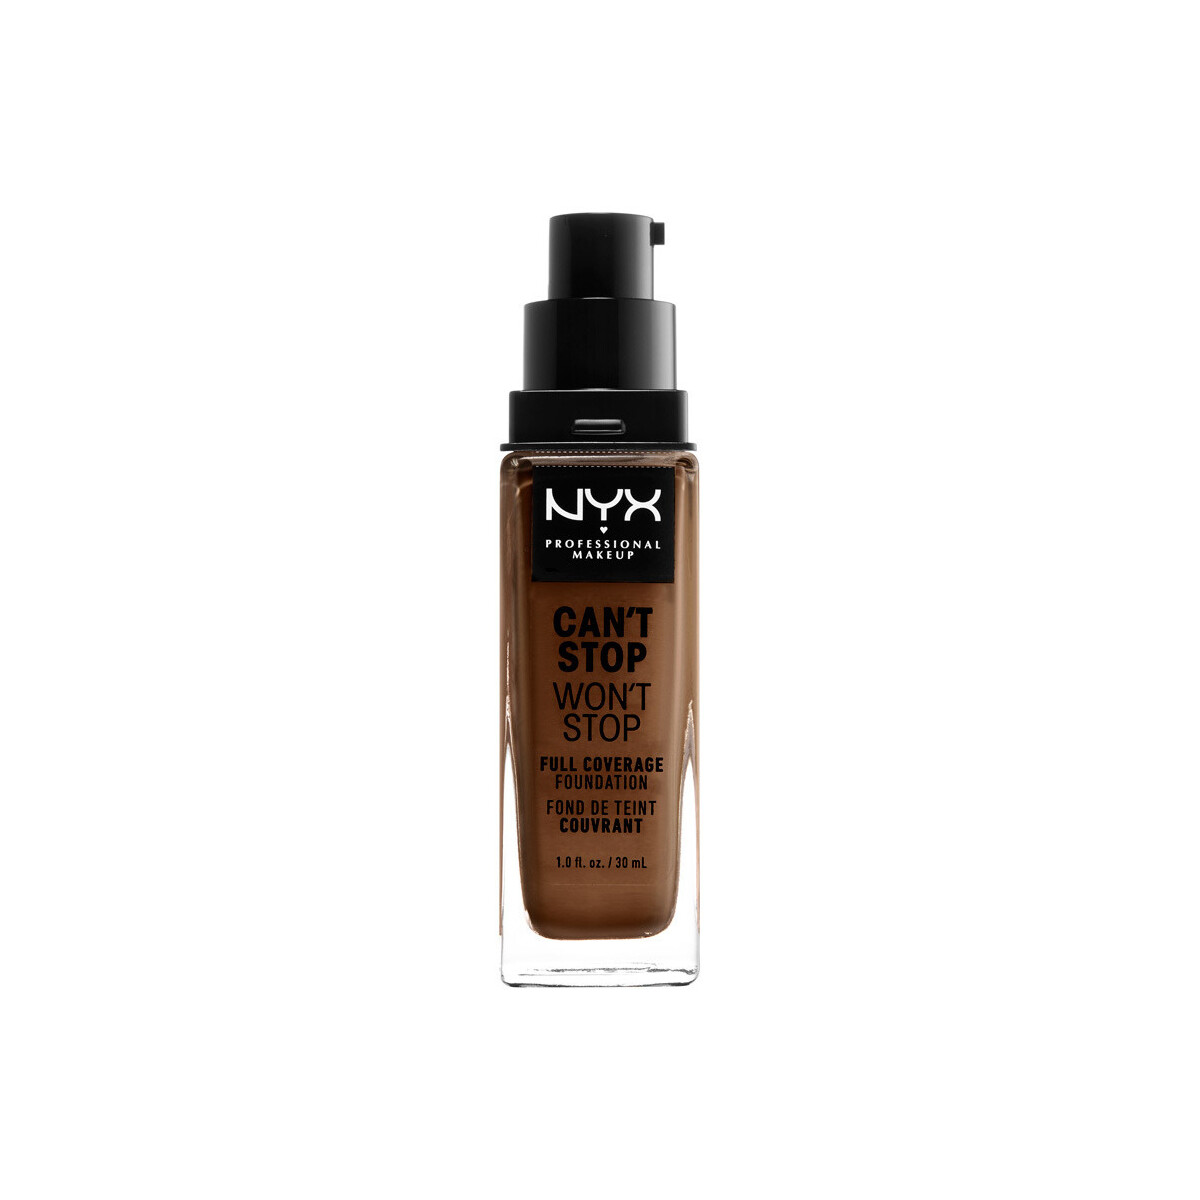 Beauté Toutes les chaussures femme House of Hounds Can't Stop Won't Stop Full Coverage Foundation cocoa 